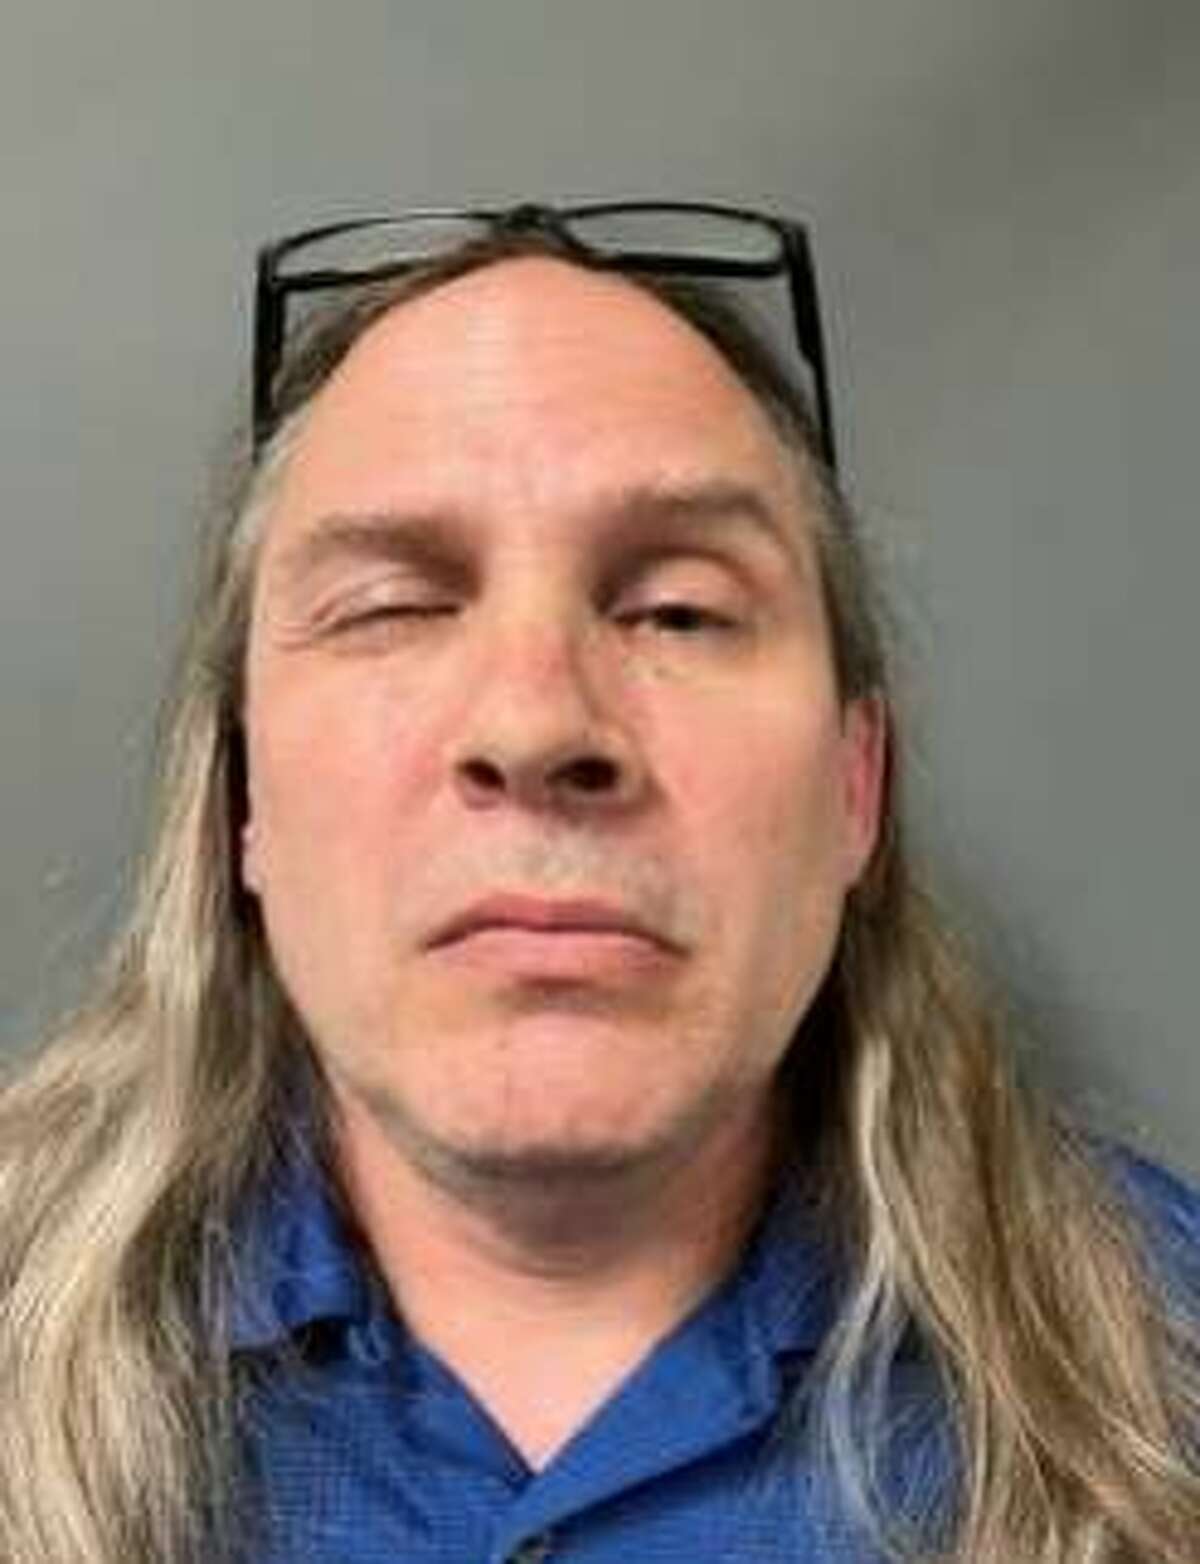 Mark Henry Frakl, of Marlborough, is accused of making a bomb threat in Tennessee, state police say. He is in custody on a fugitive from justice charge.